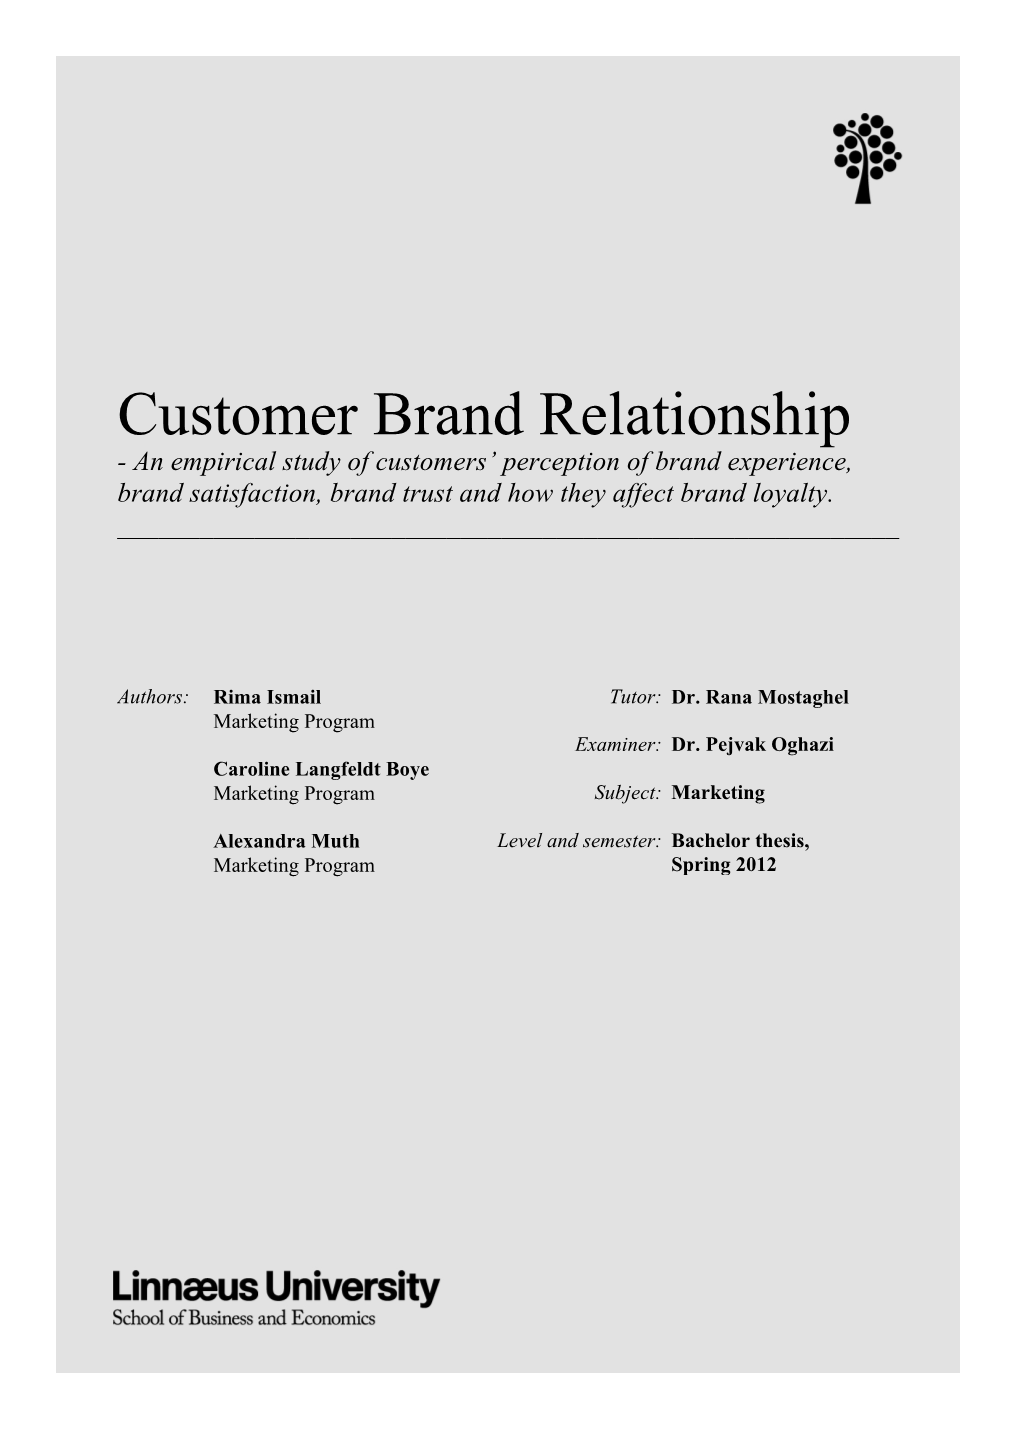 Customer Brand Relationship - an Empirical Study of Customers’ Perception of Brand Experience, Brand Satisfaction, Brand Trust and How They Affect Brand Loyalty